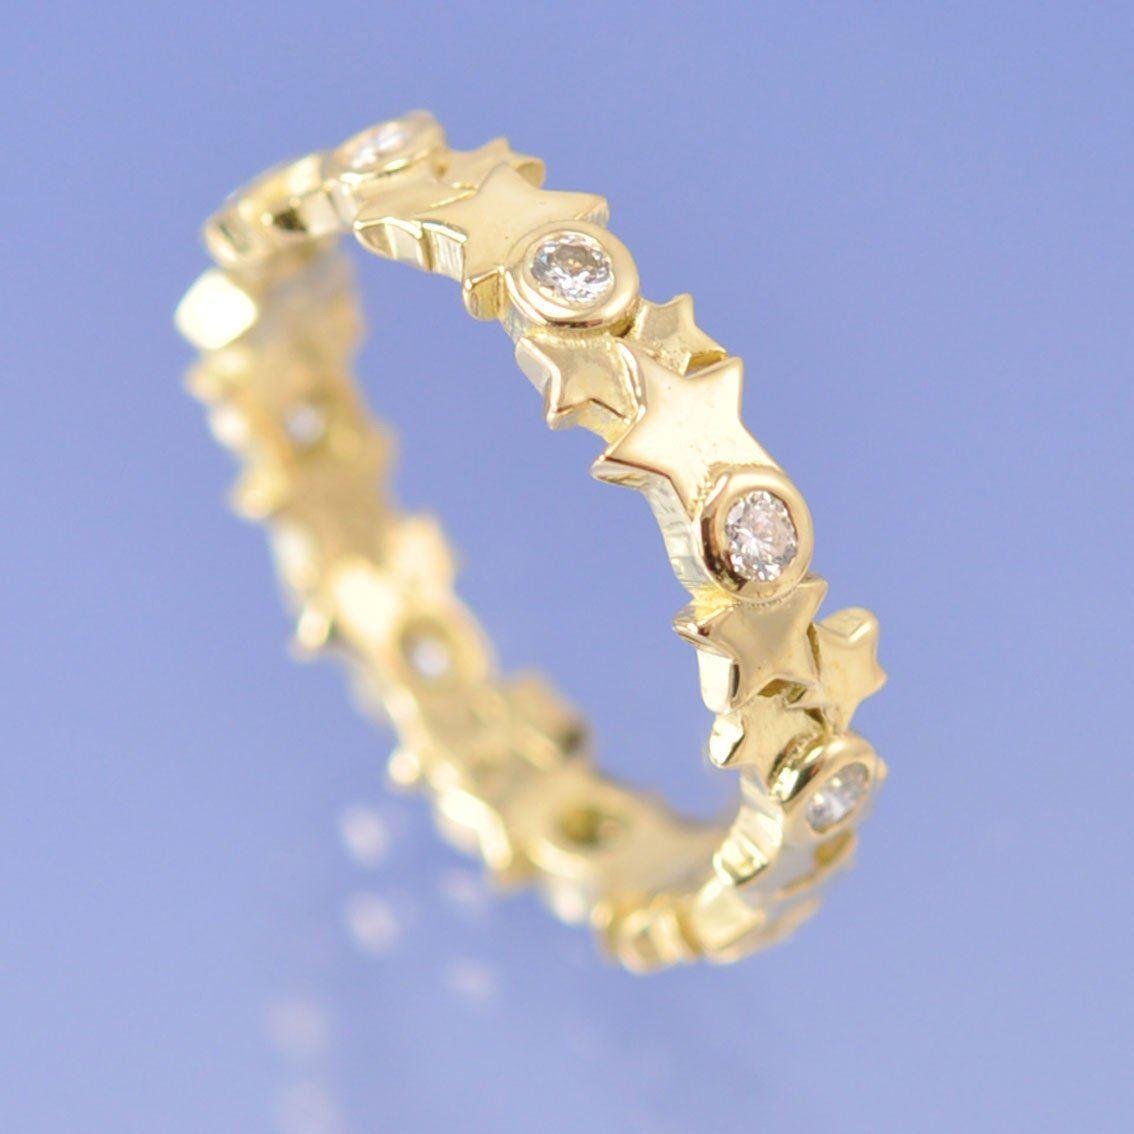 Diamond Star Ring. 0.27ct Ring by Chris Parry Jewellery